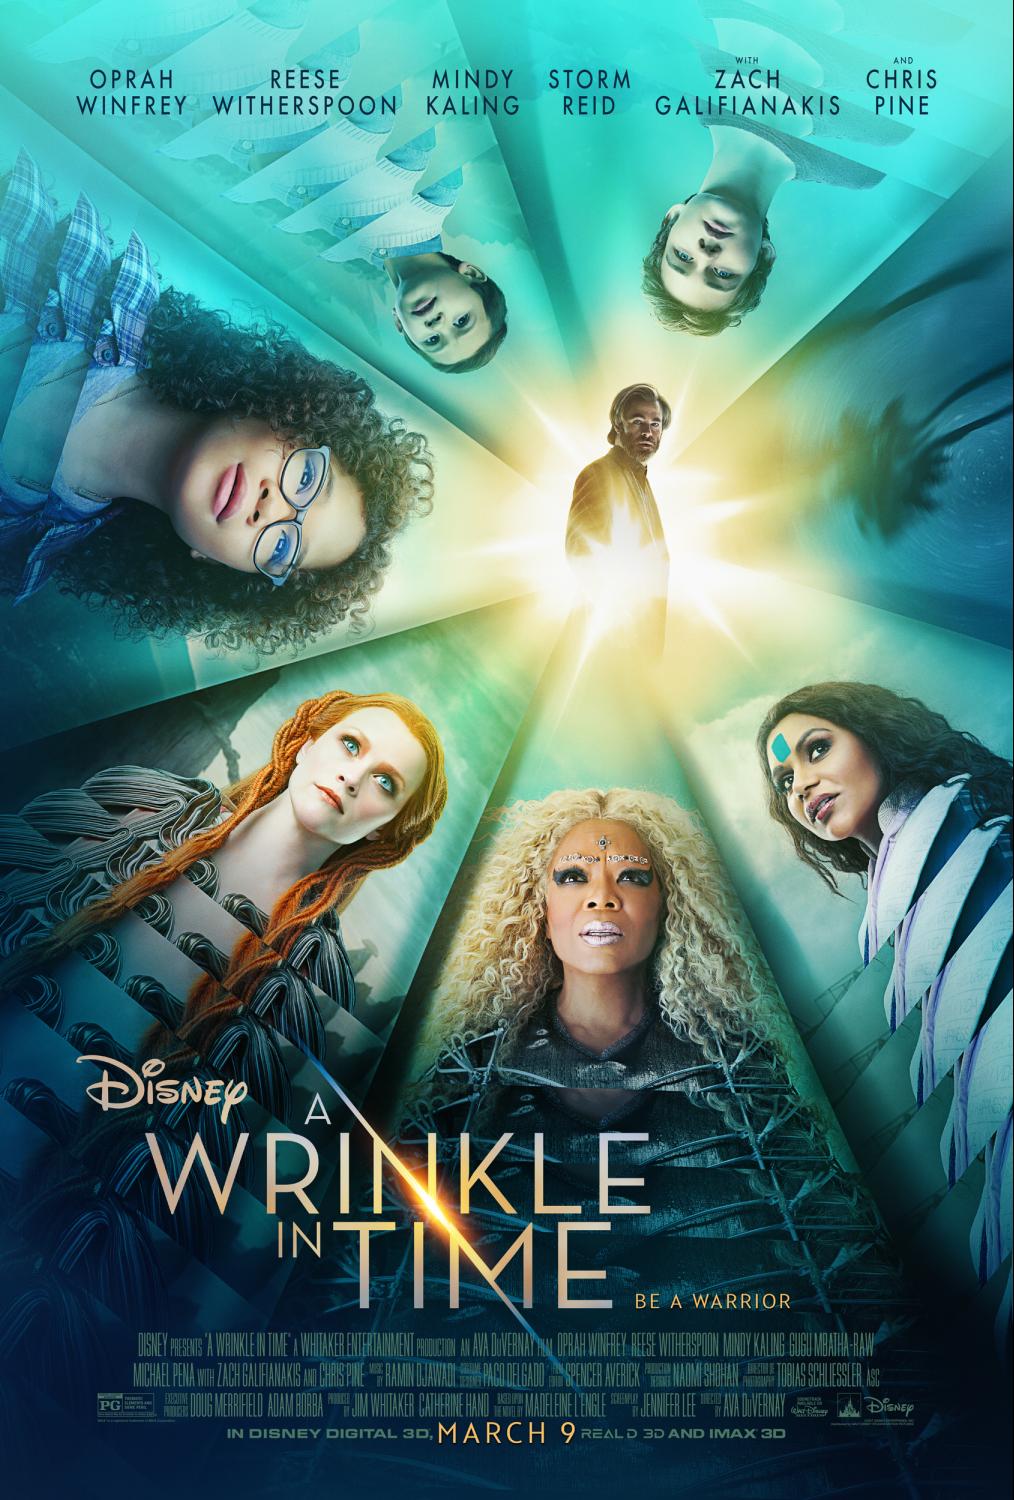 Disney’s A Wrinkle in Time Trailer